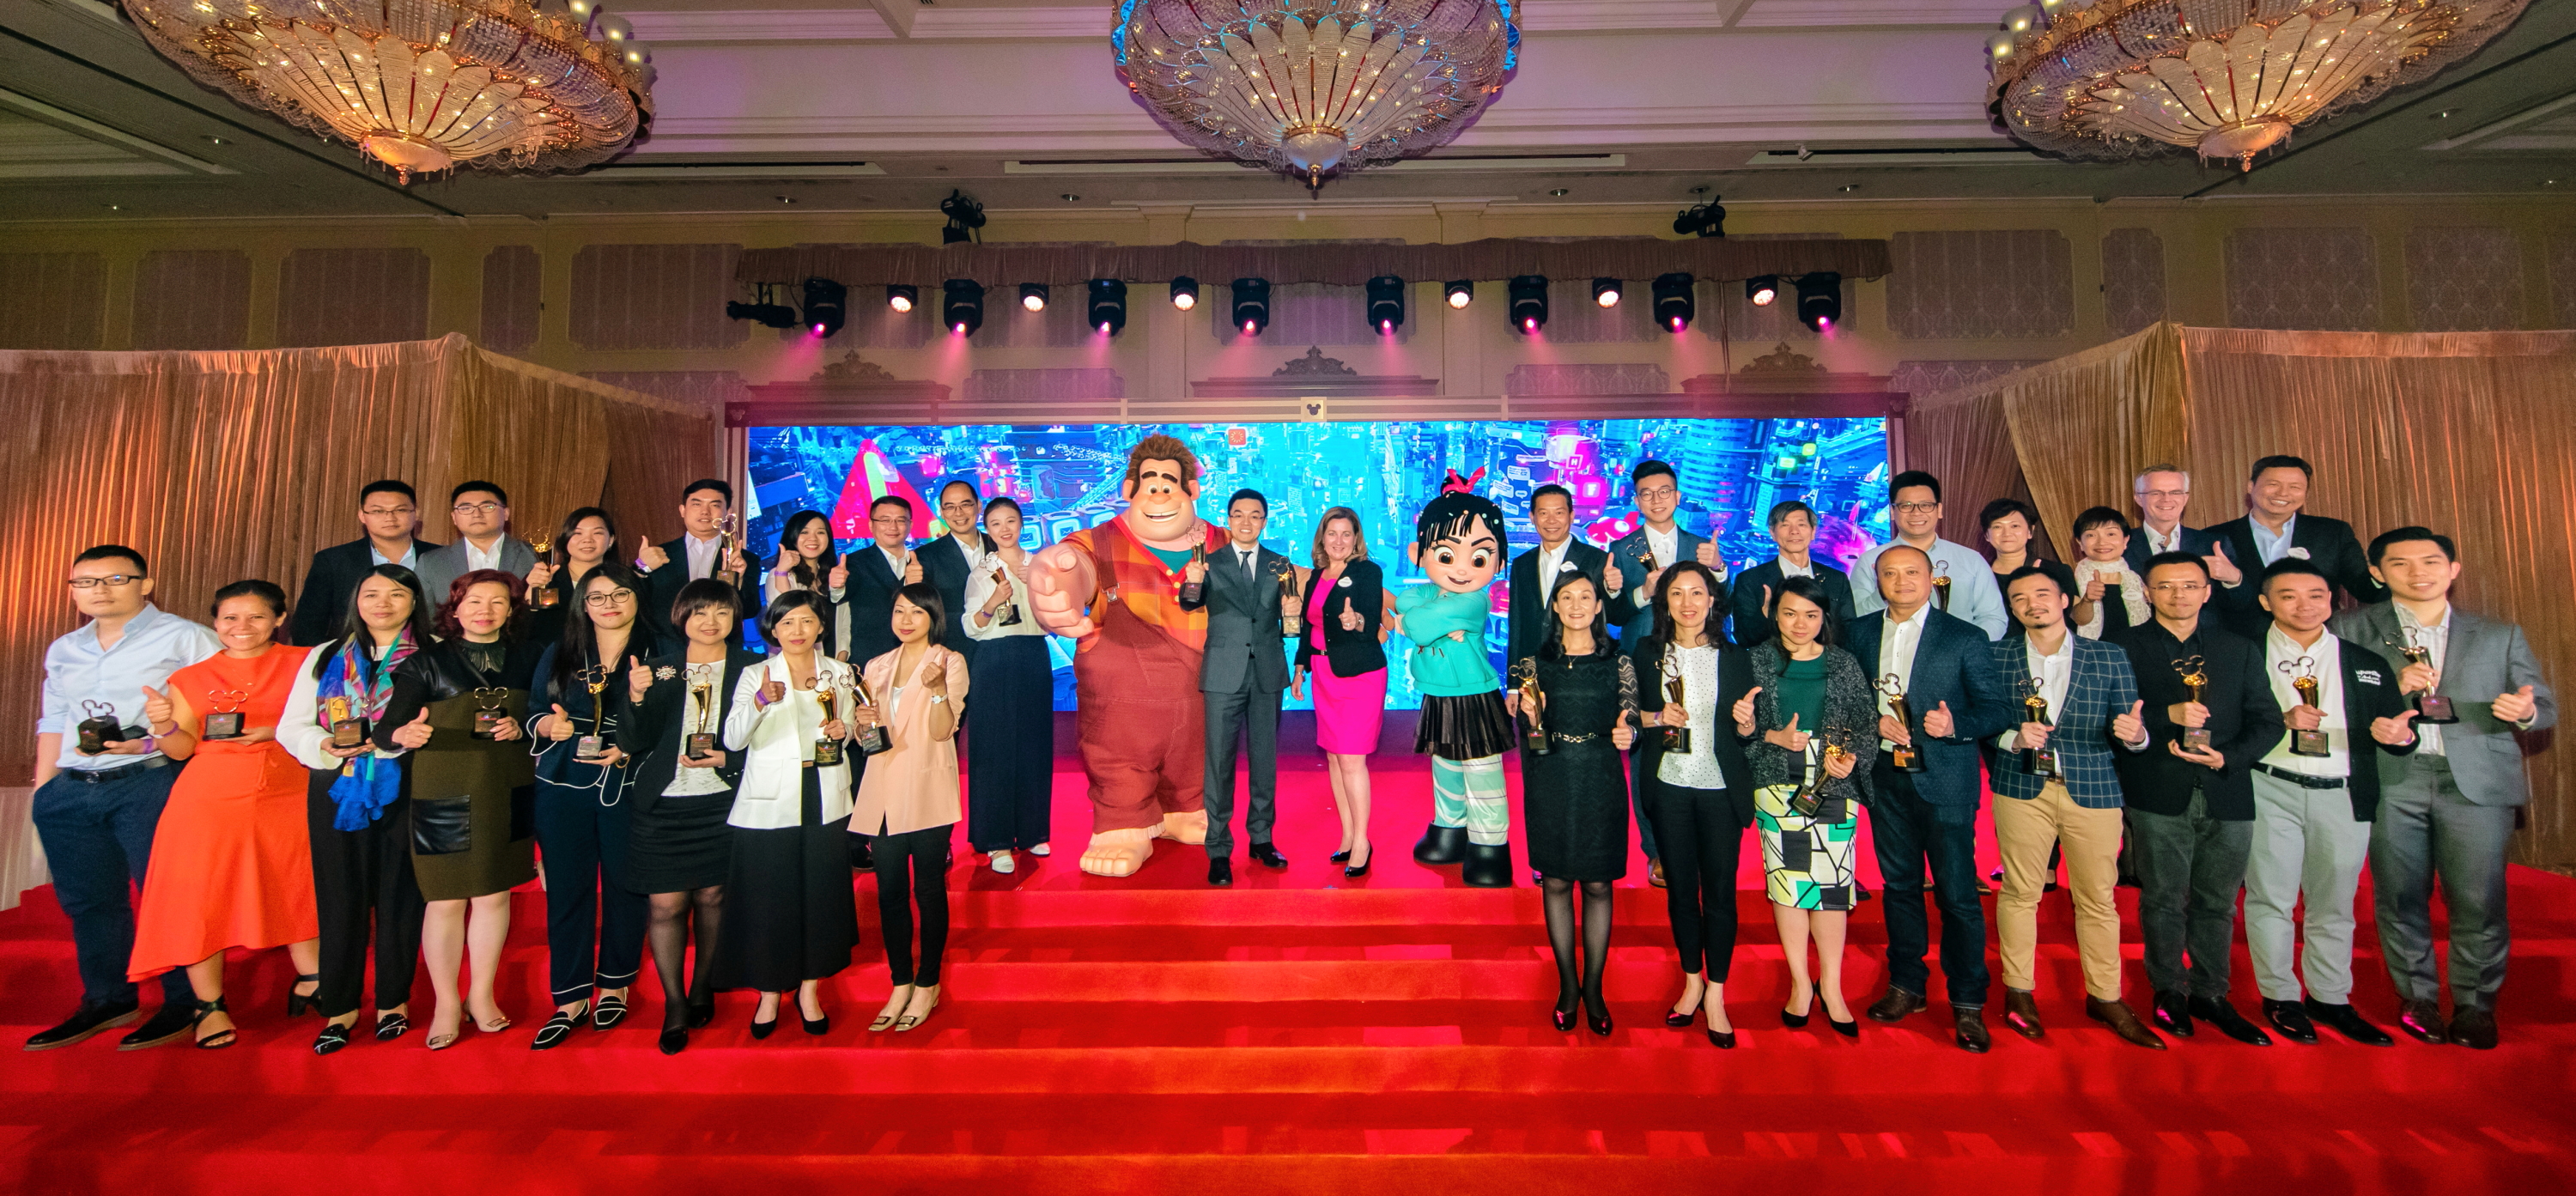 Hong Kong Disneyland Resort (HKDL) hosted its annual Celebration of Sales Excellence (CSE) on Friday. The fun awards dinner celebrates HKDL's top-performing travel trade partners who in 2018 brought an ever-growing number of guests from around the world to enjoy the resorts magical experiences.. Click to enlarge.